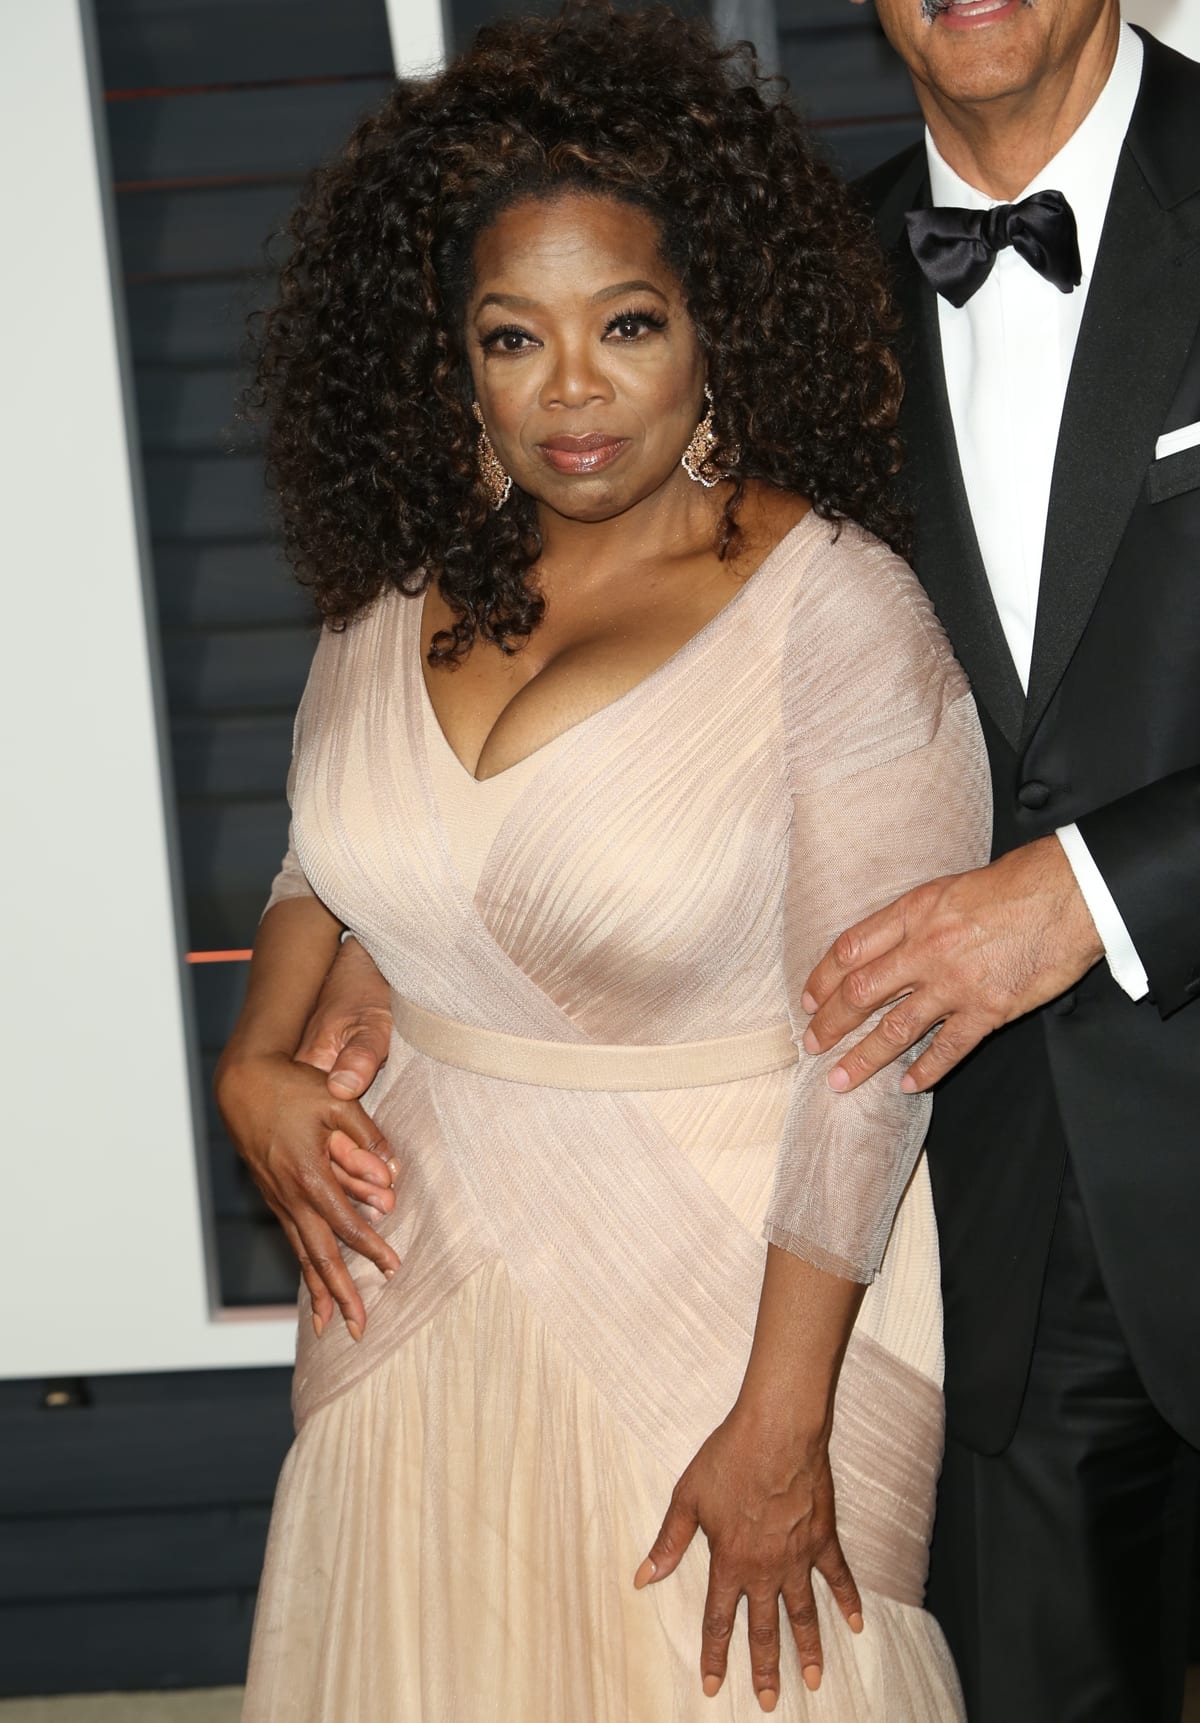 Trois Pommes in Zurich reportedly refused to show Oprah Winfrey a $38,000 crocodile skin handbag by Tom Ford